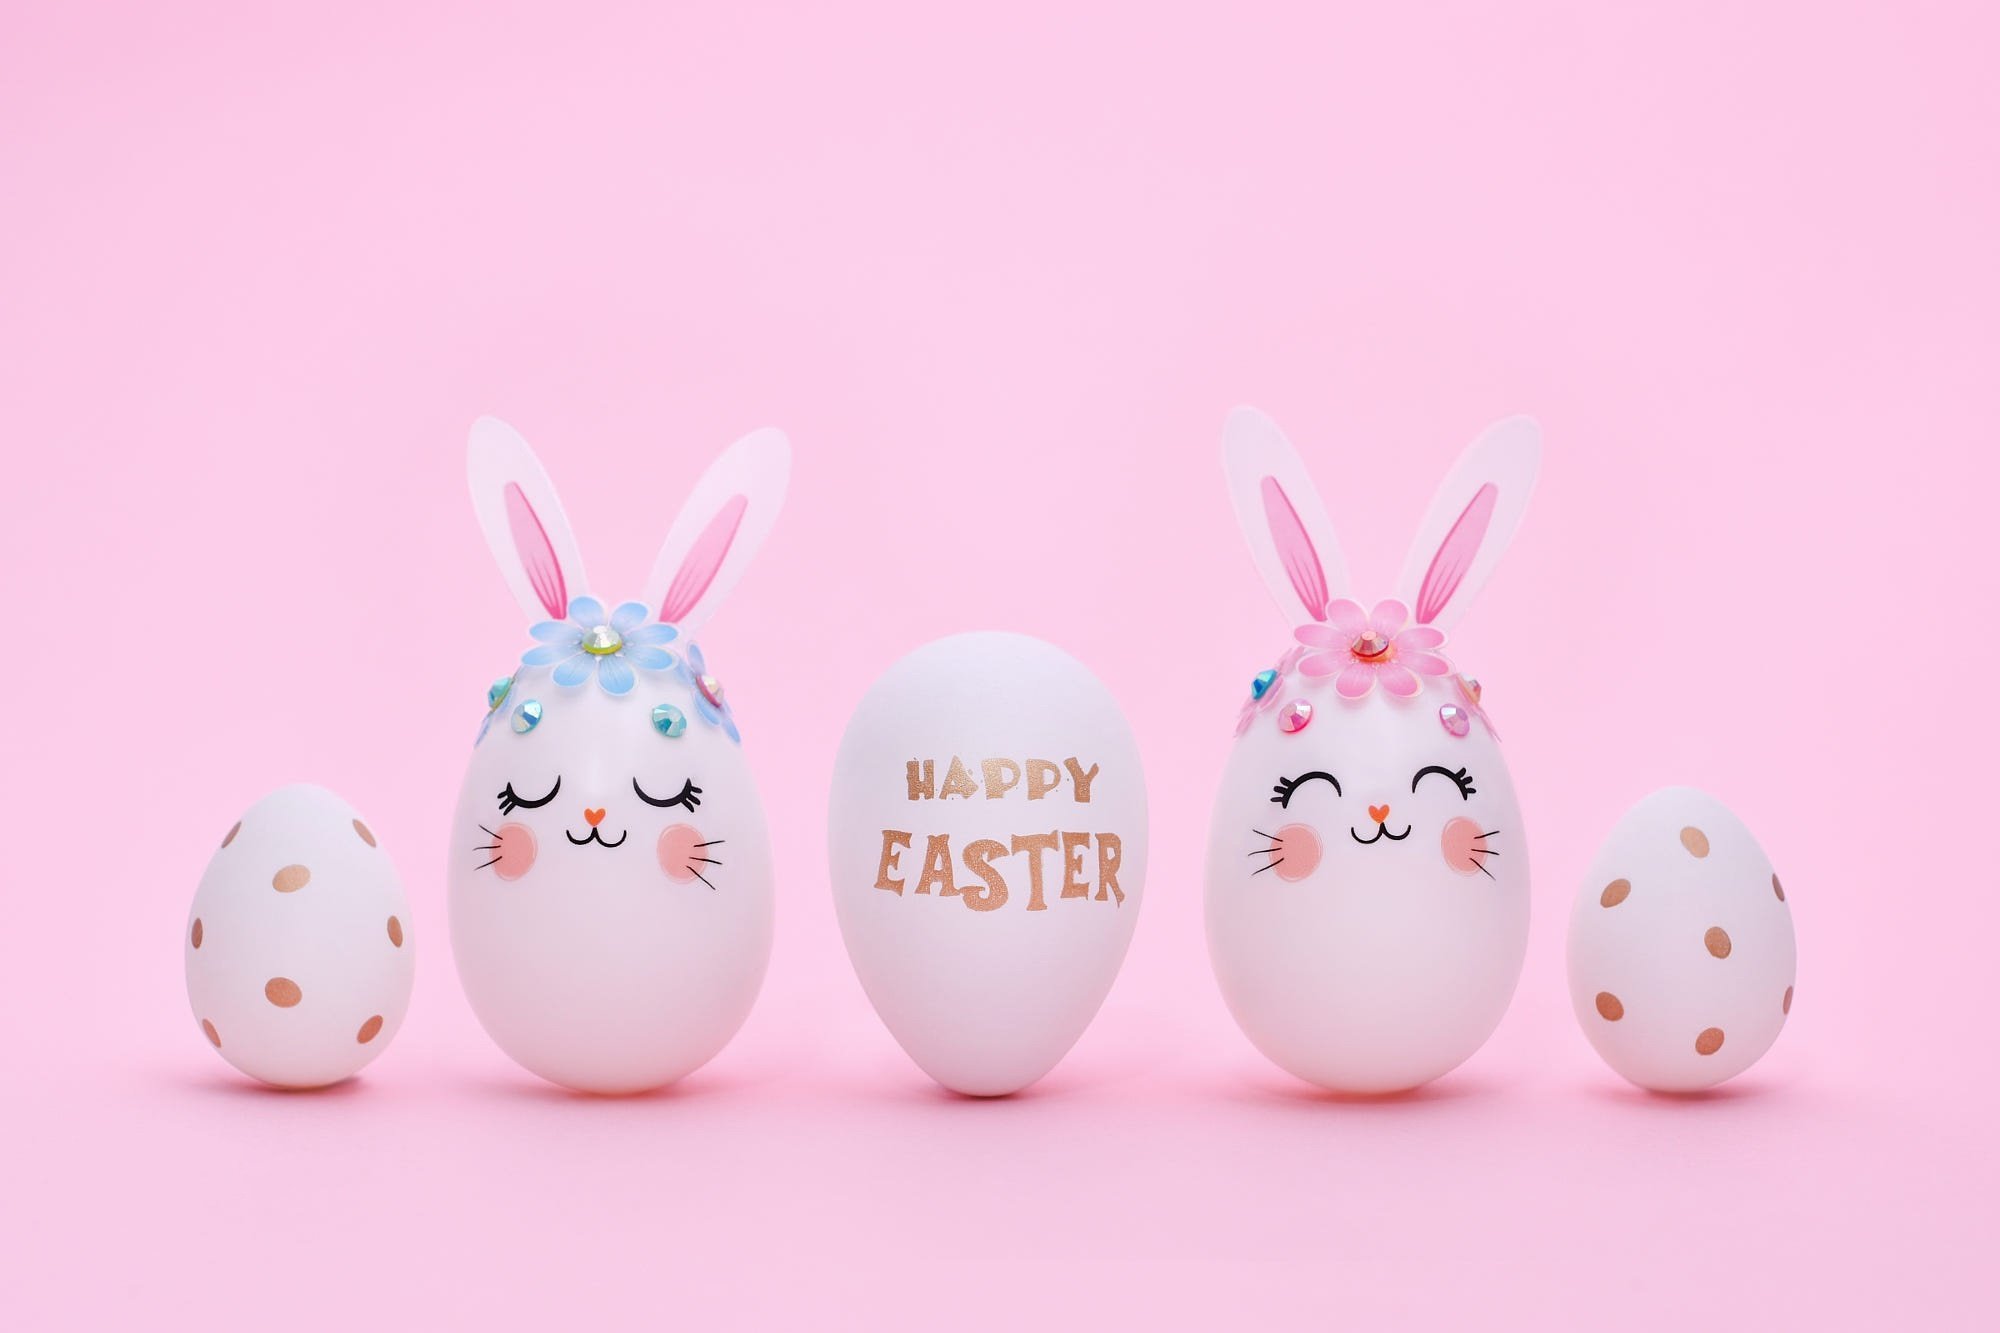 Easter HD, Happy Easter, Easter Egg Gallery HD Wallpaper